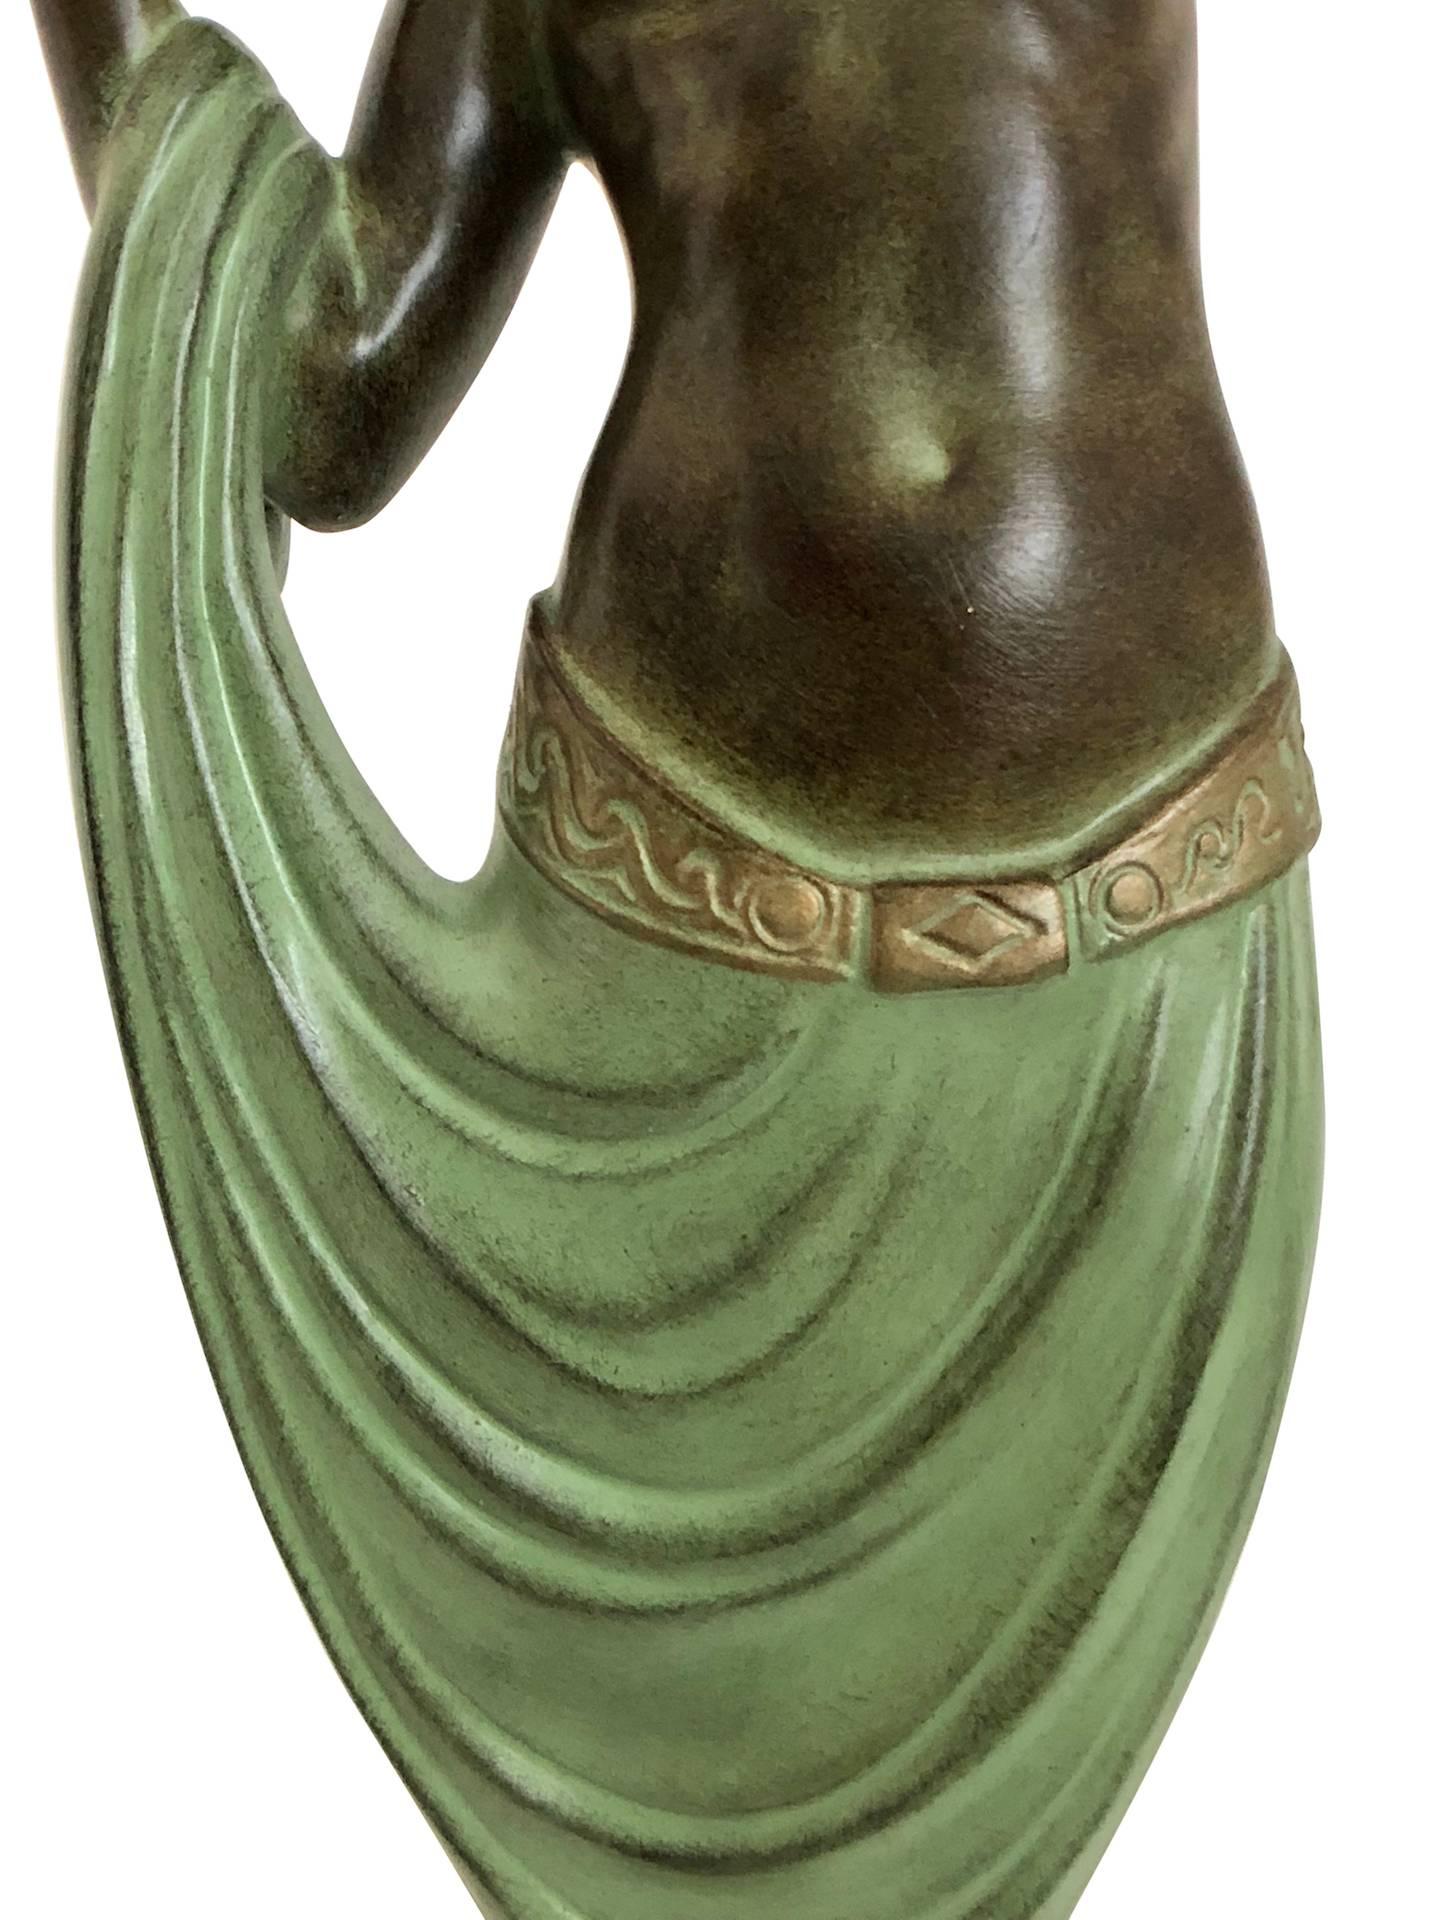 Contemporary Lamp, Sculpture in Spelter, Odalisque by Fayral, Original Max Le Verrier